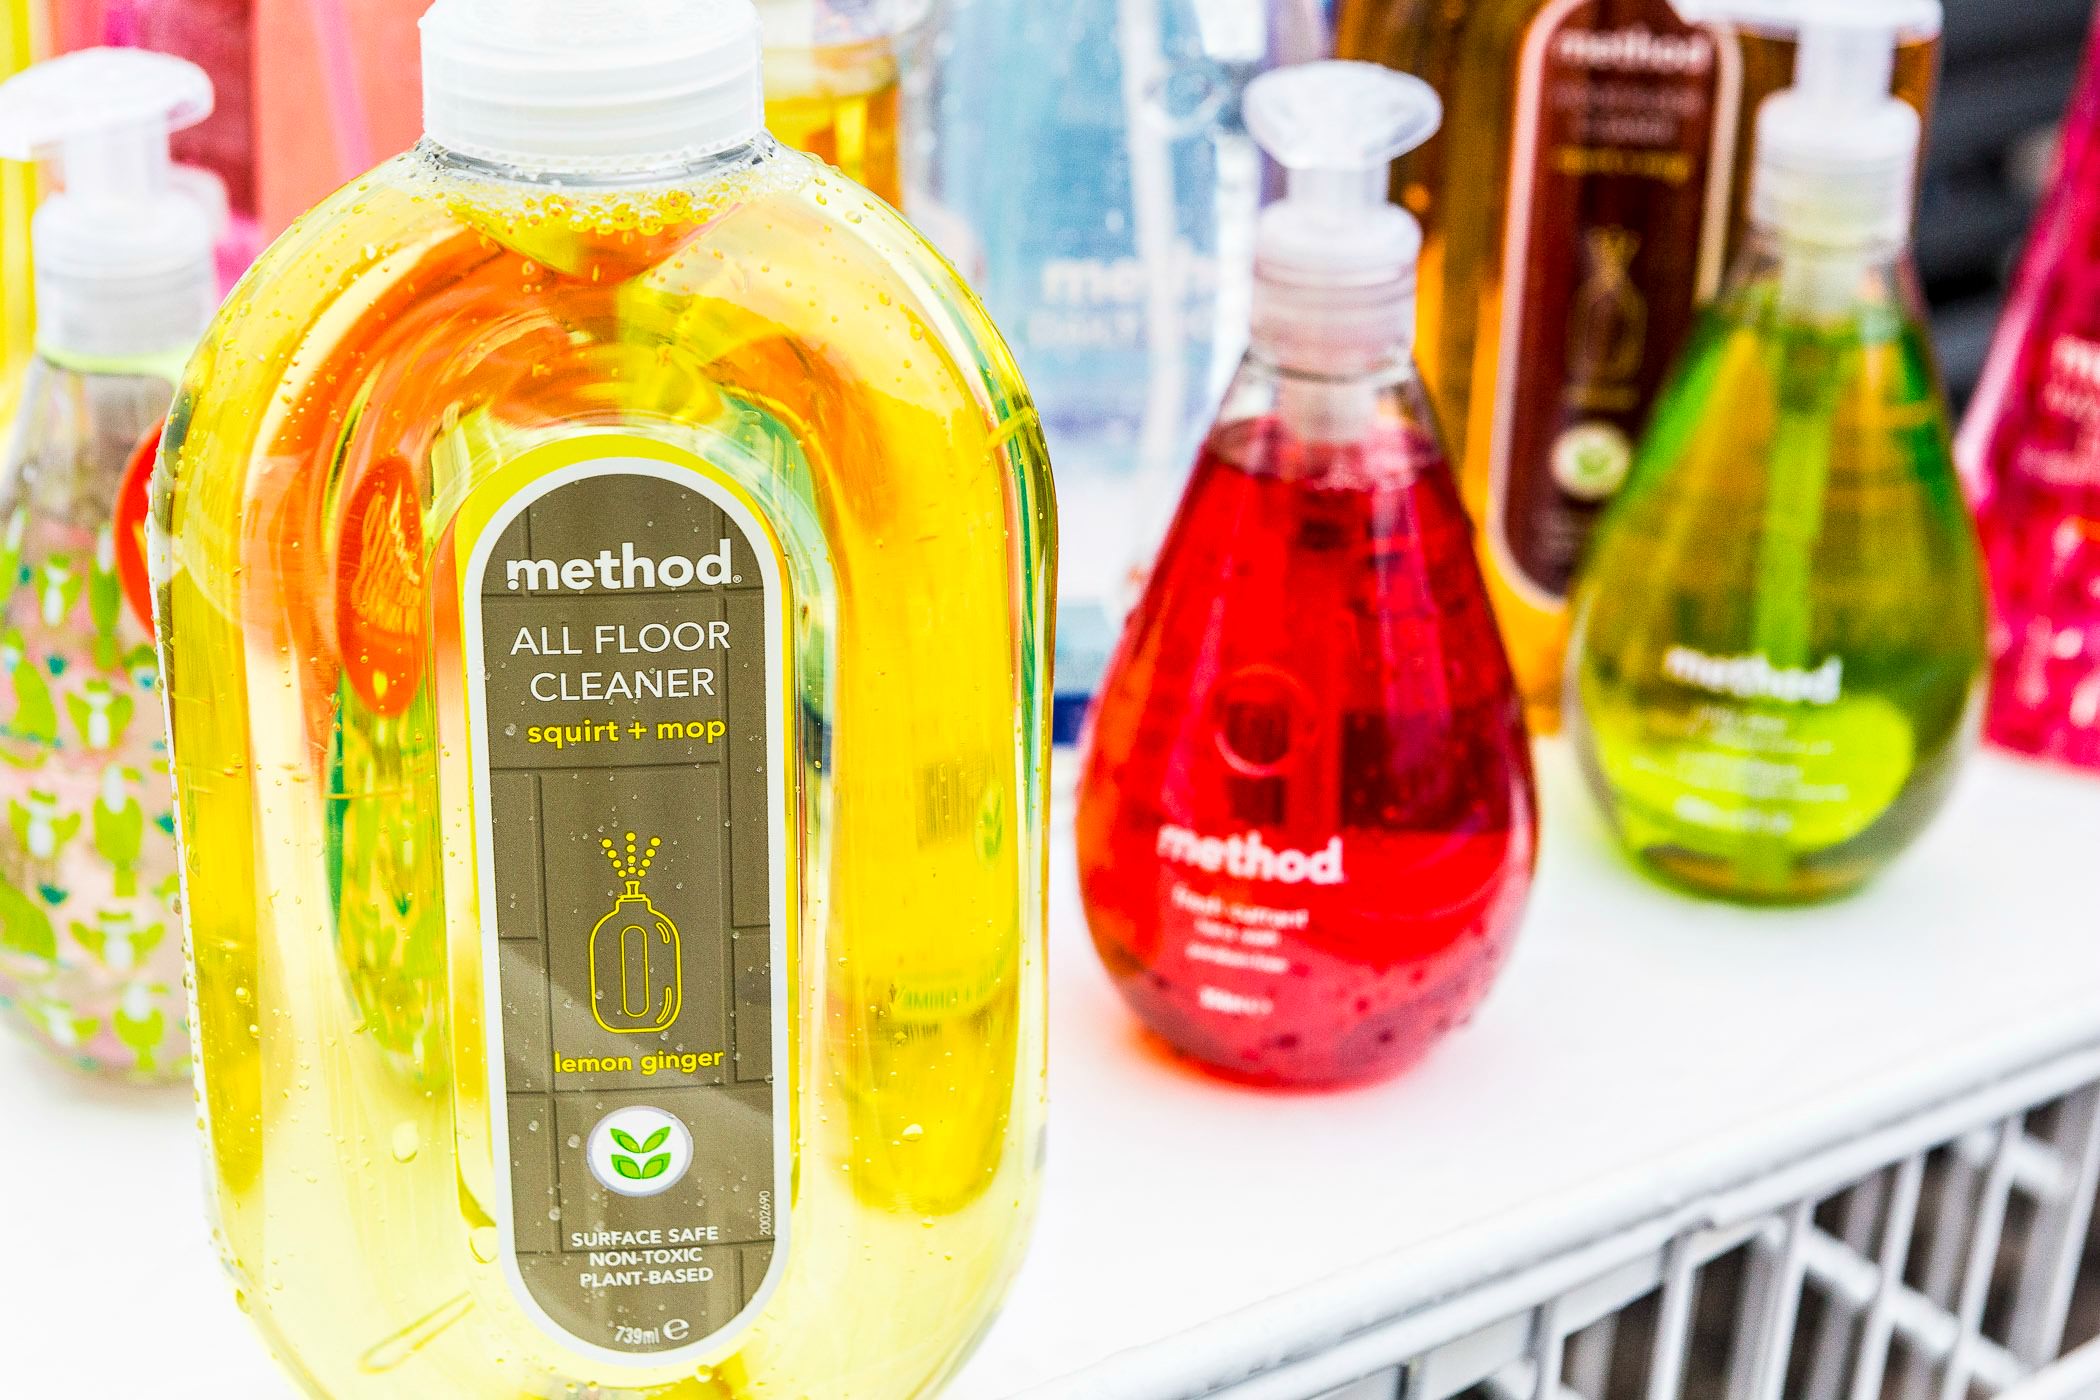 Method-cleaning-products-on-Little-Big-Bell-blog